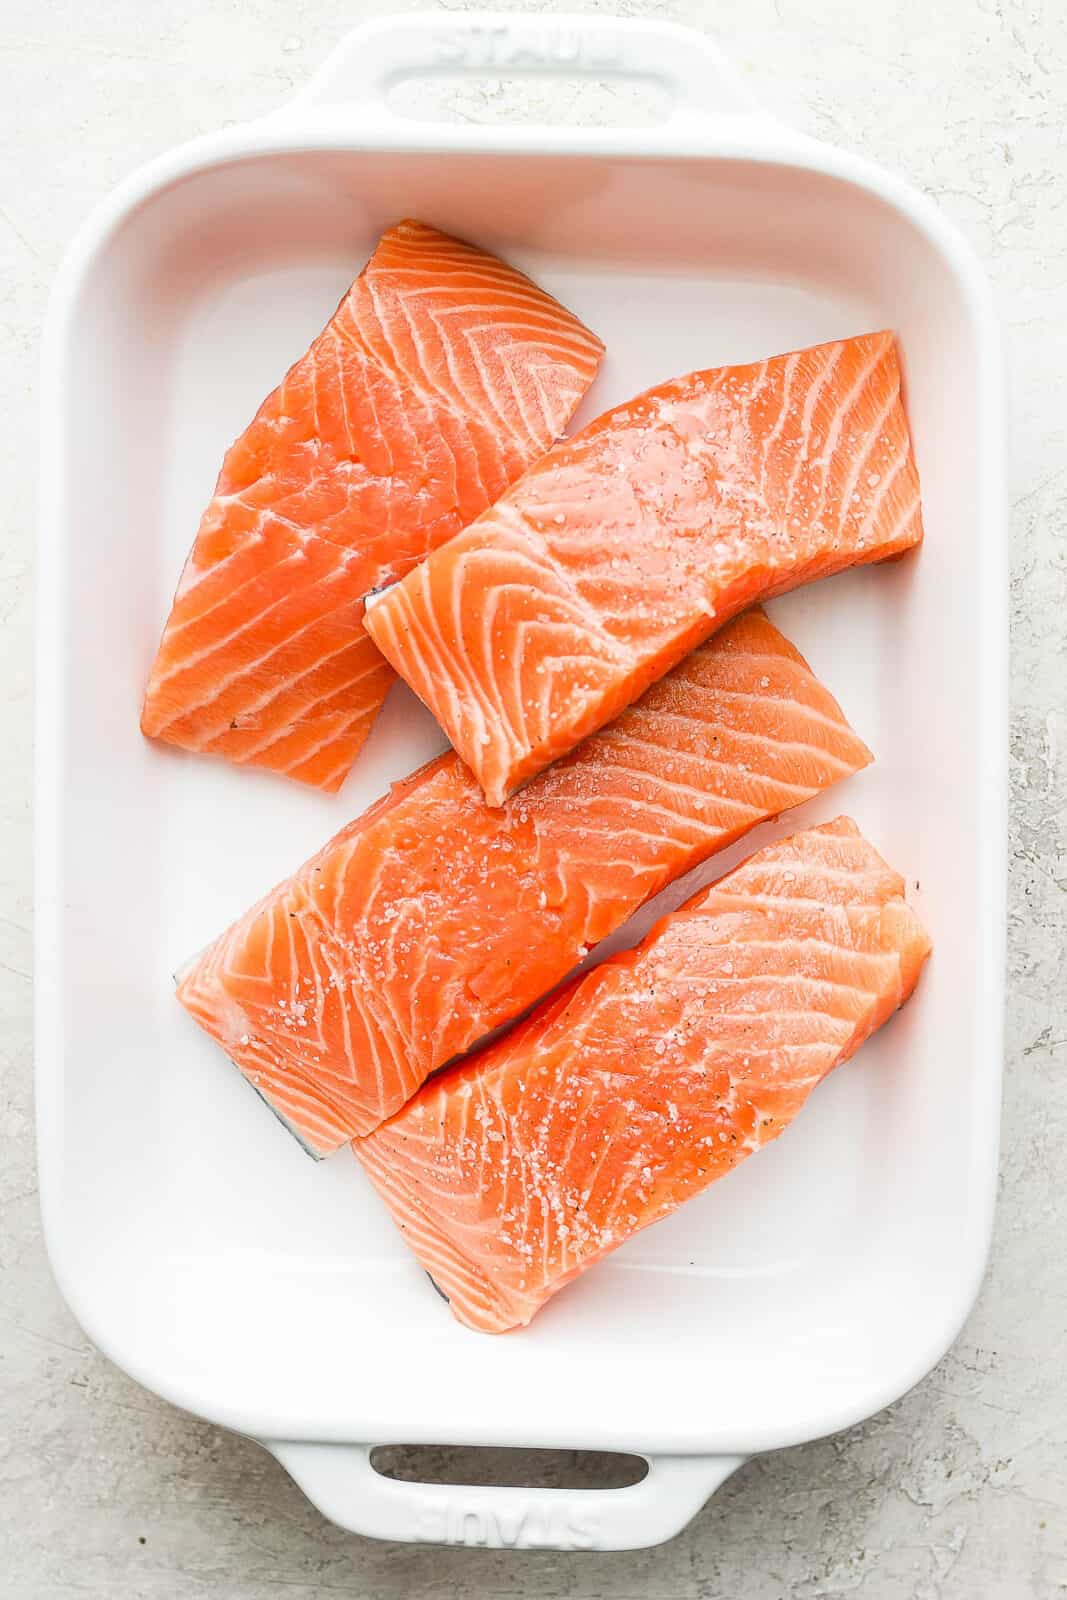 Salmon fillets in a baking dish.